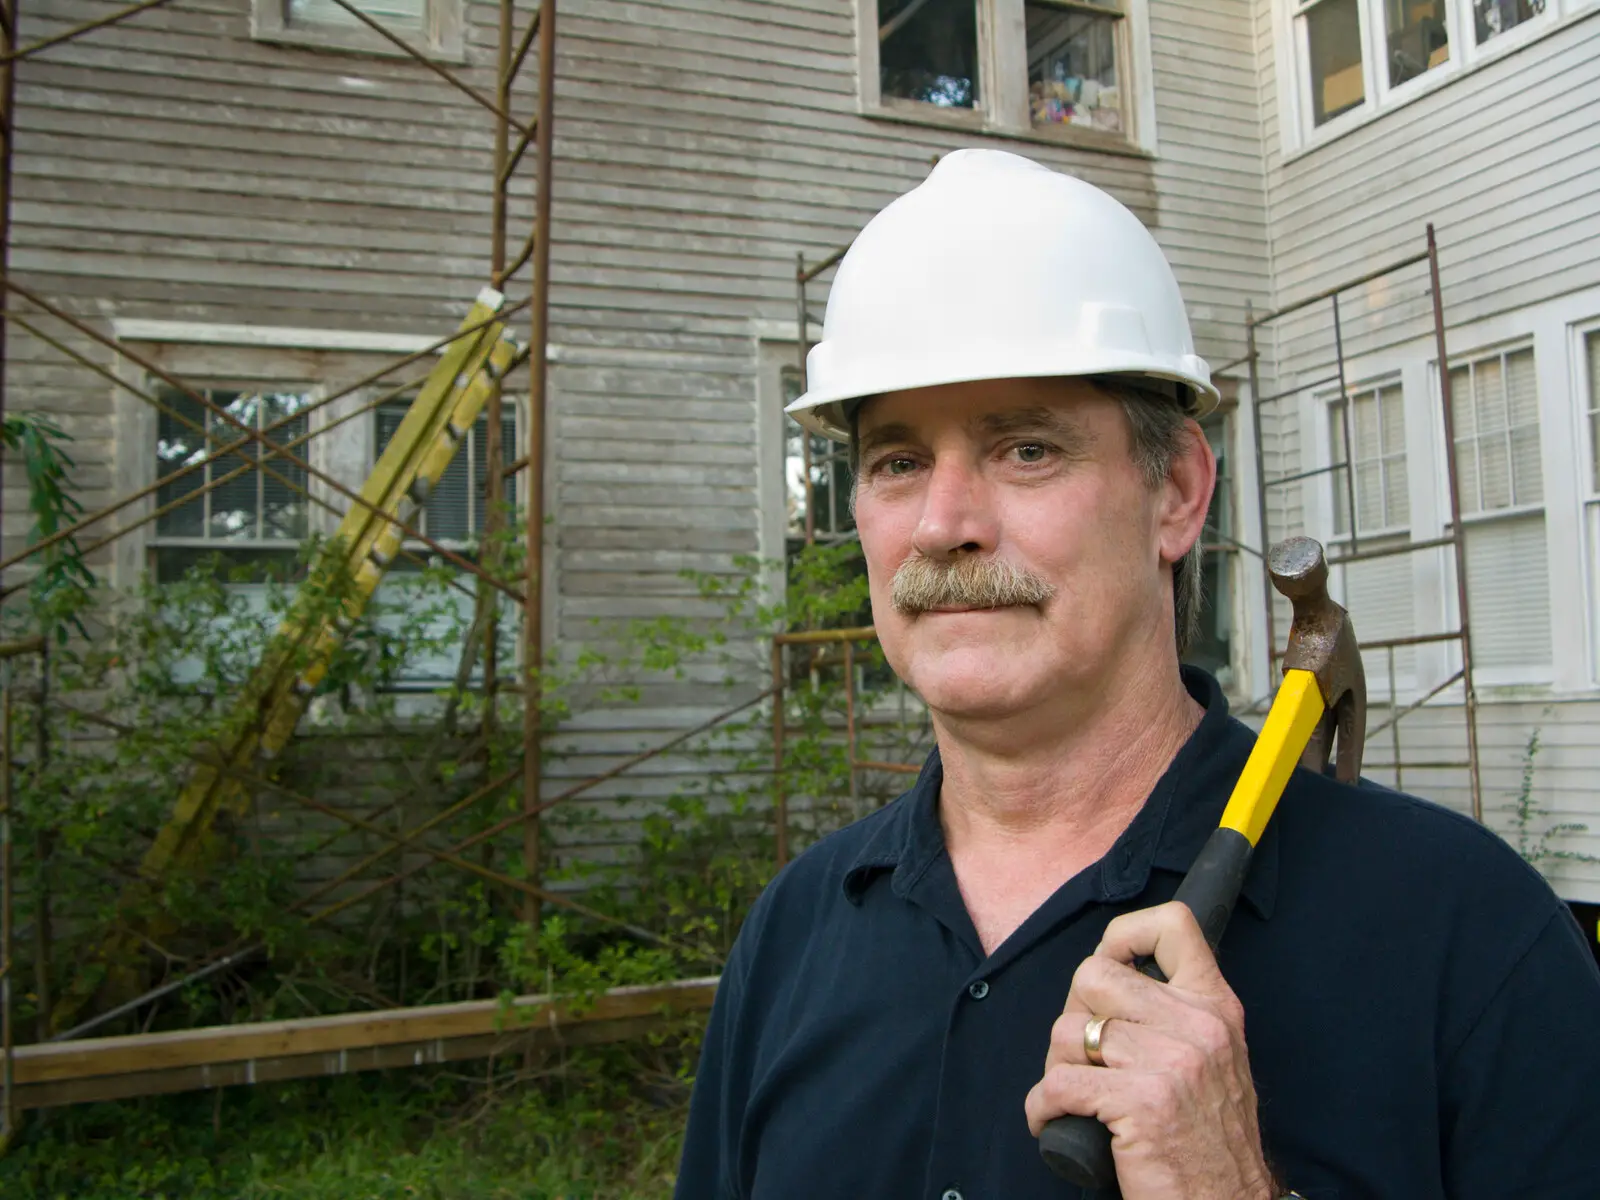 Home Repair Scams Targeting Seniors - Man holding a hammer restring on his shoulder with a house in the background with scaffolding and overgrown shrubs around it